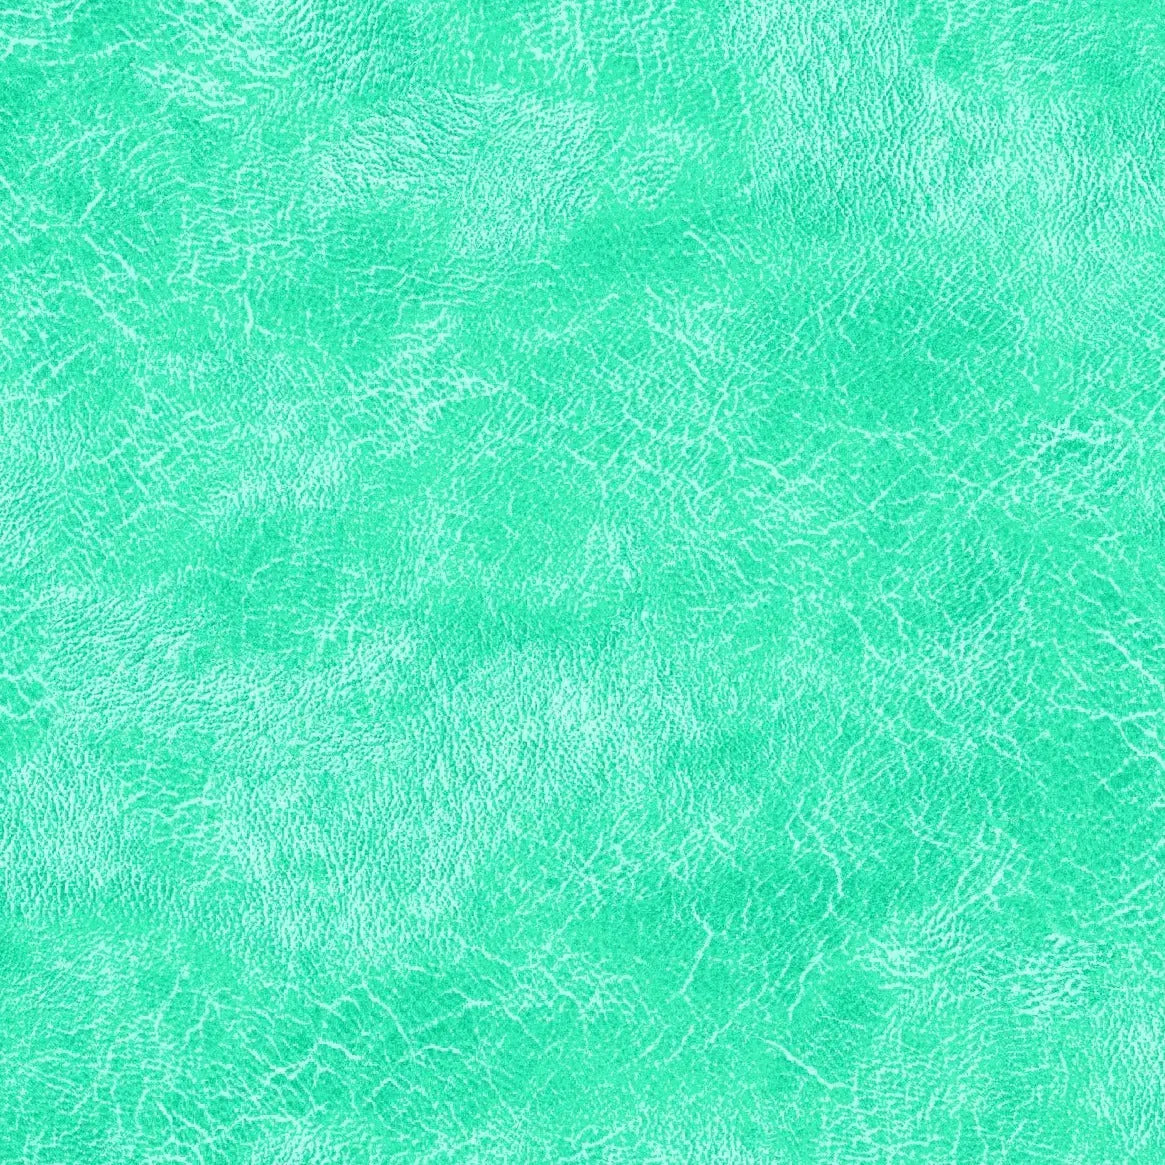 Green Aqua Crackles Cotton Wideback Fabric ( 1 yard pack ) - Linda's Electric Quilters